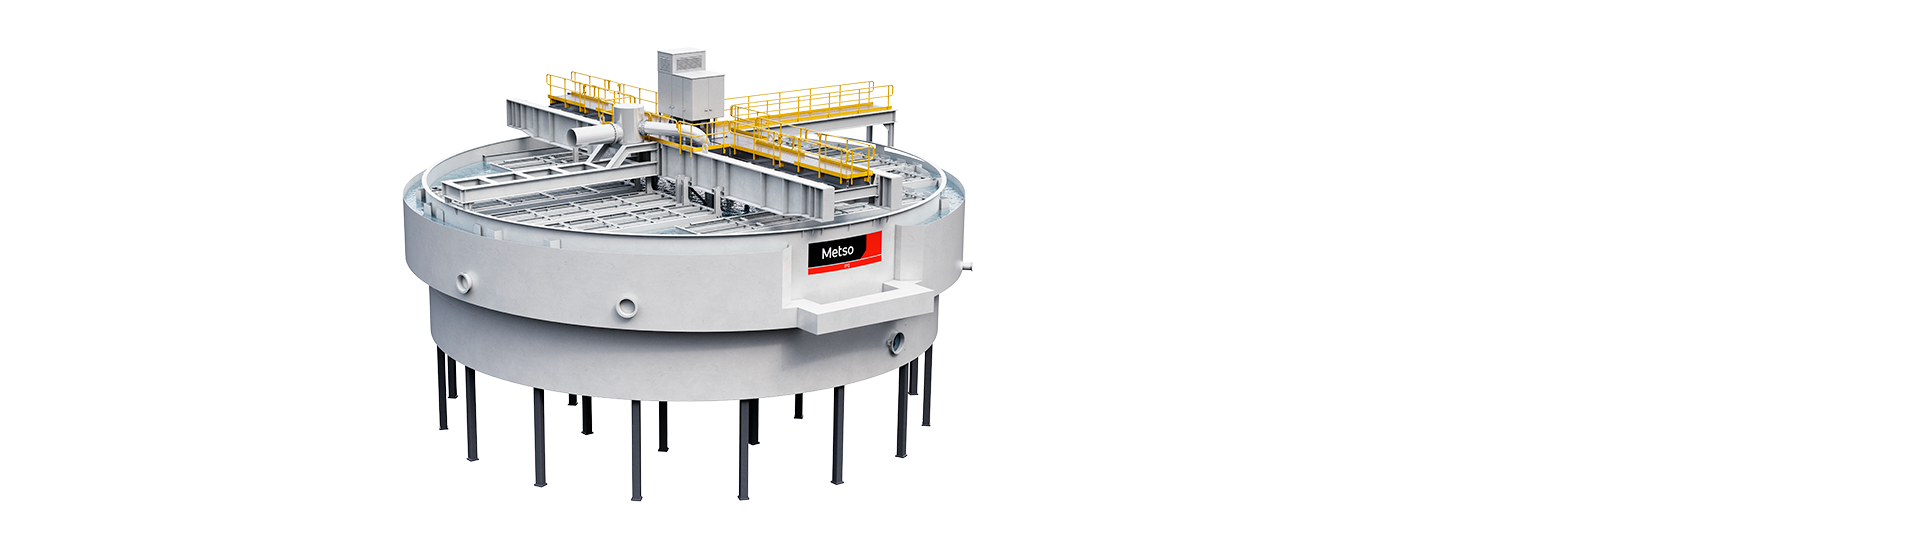 IPS Series inclined plate settlers provide maximum process recovery with minimum plant footprint.